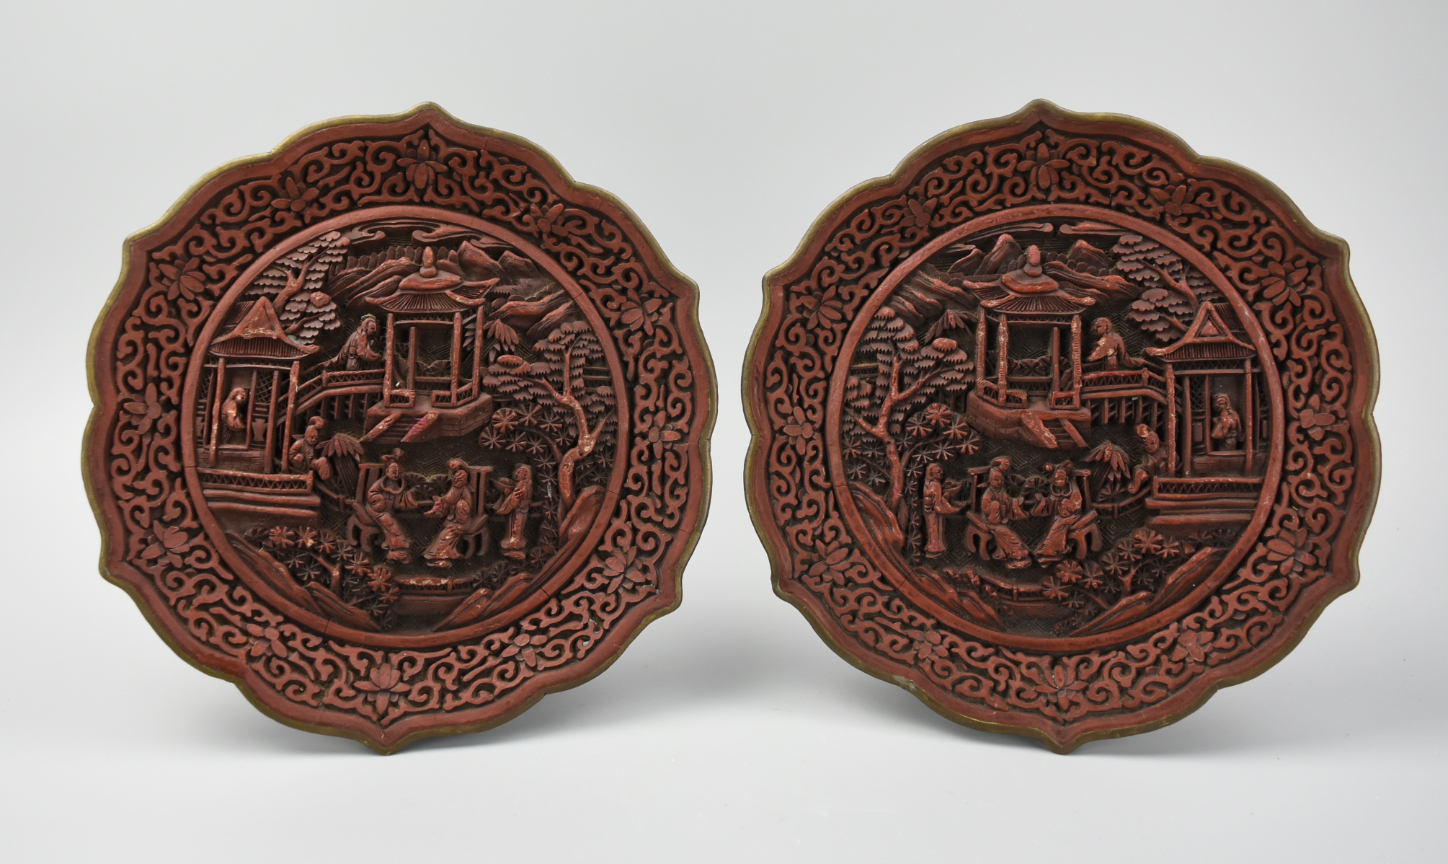 PAIR OF CHINESE LACQUERWARE PLATE,20TH